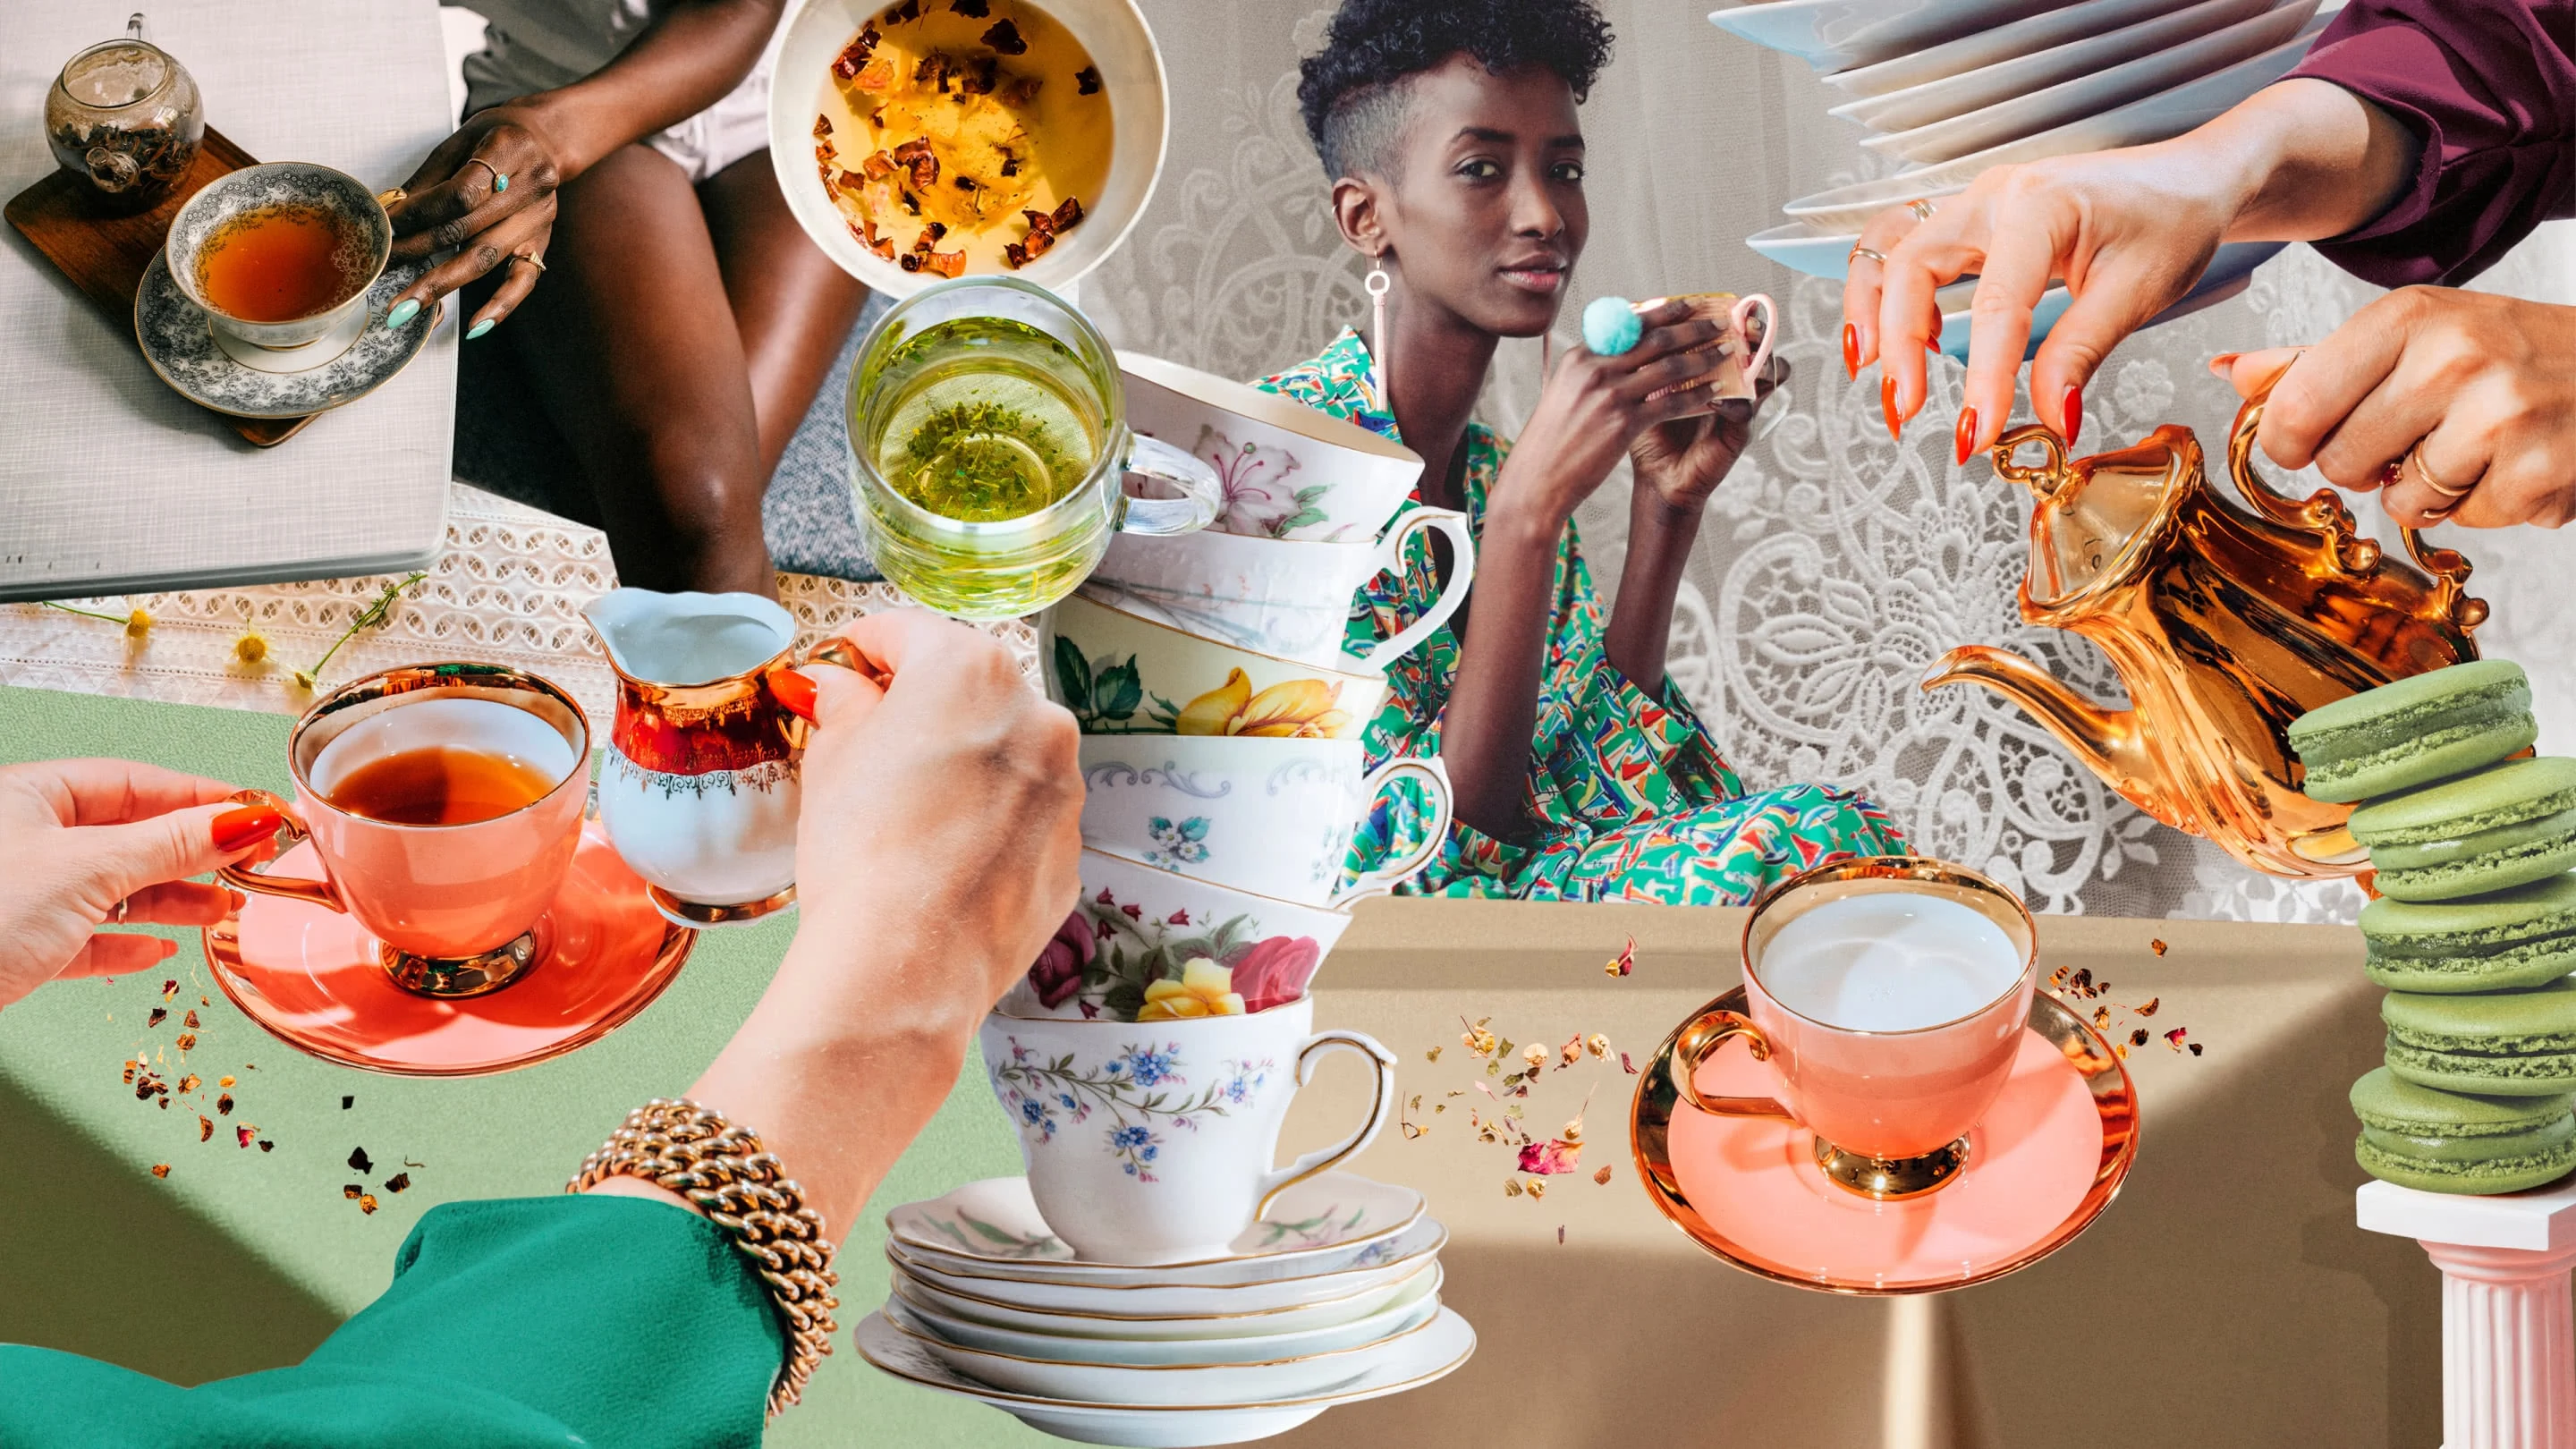 Colorful collage with stacked antique tea cups, plates and green macarons, various hands positioned with creamers above cups of amber tea and a Black woman in green in the center, looking at the camera and holding a gold cup